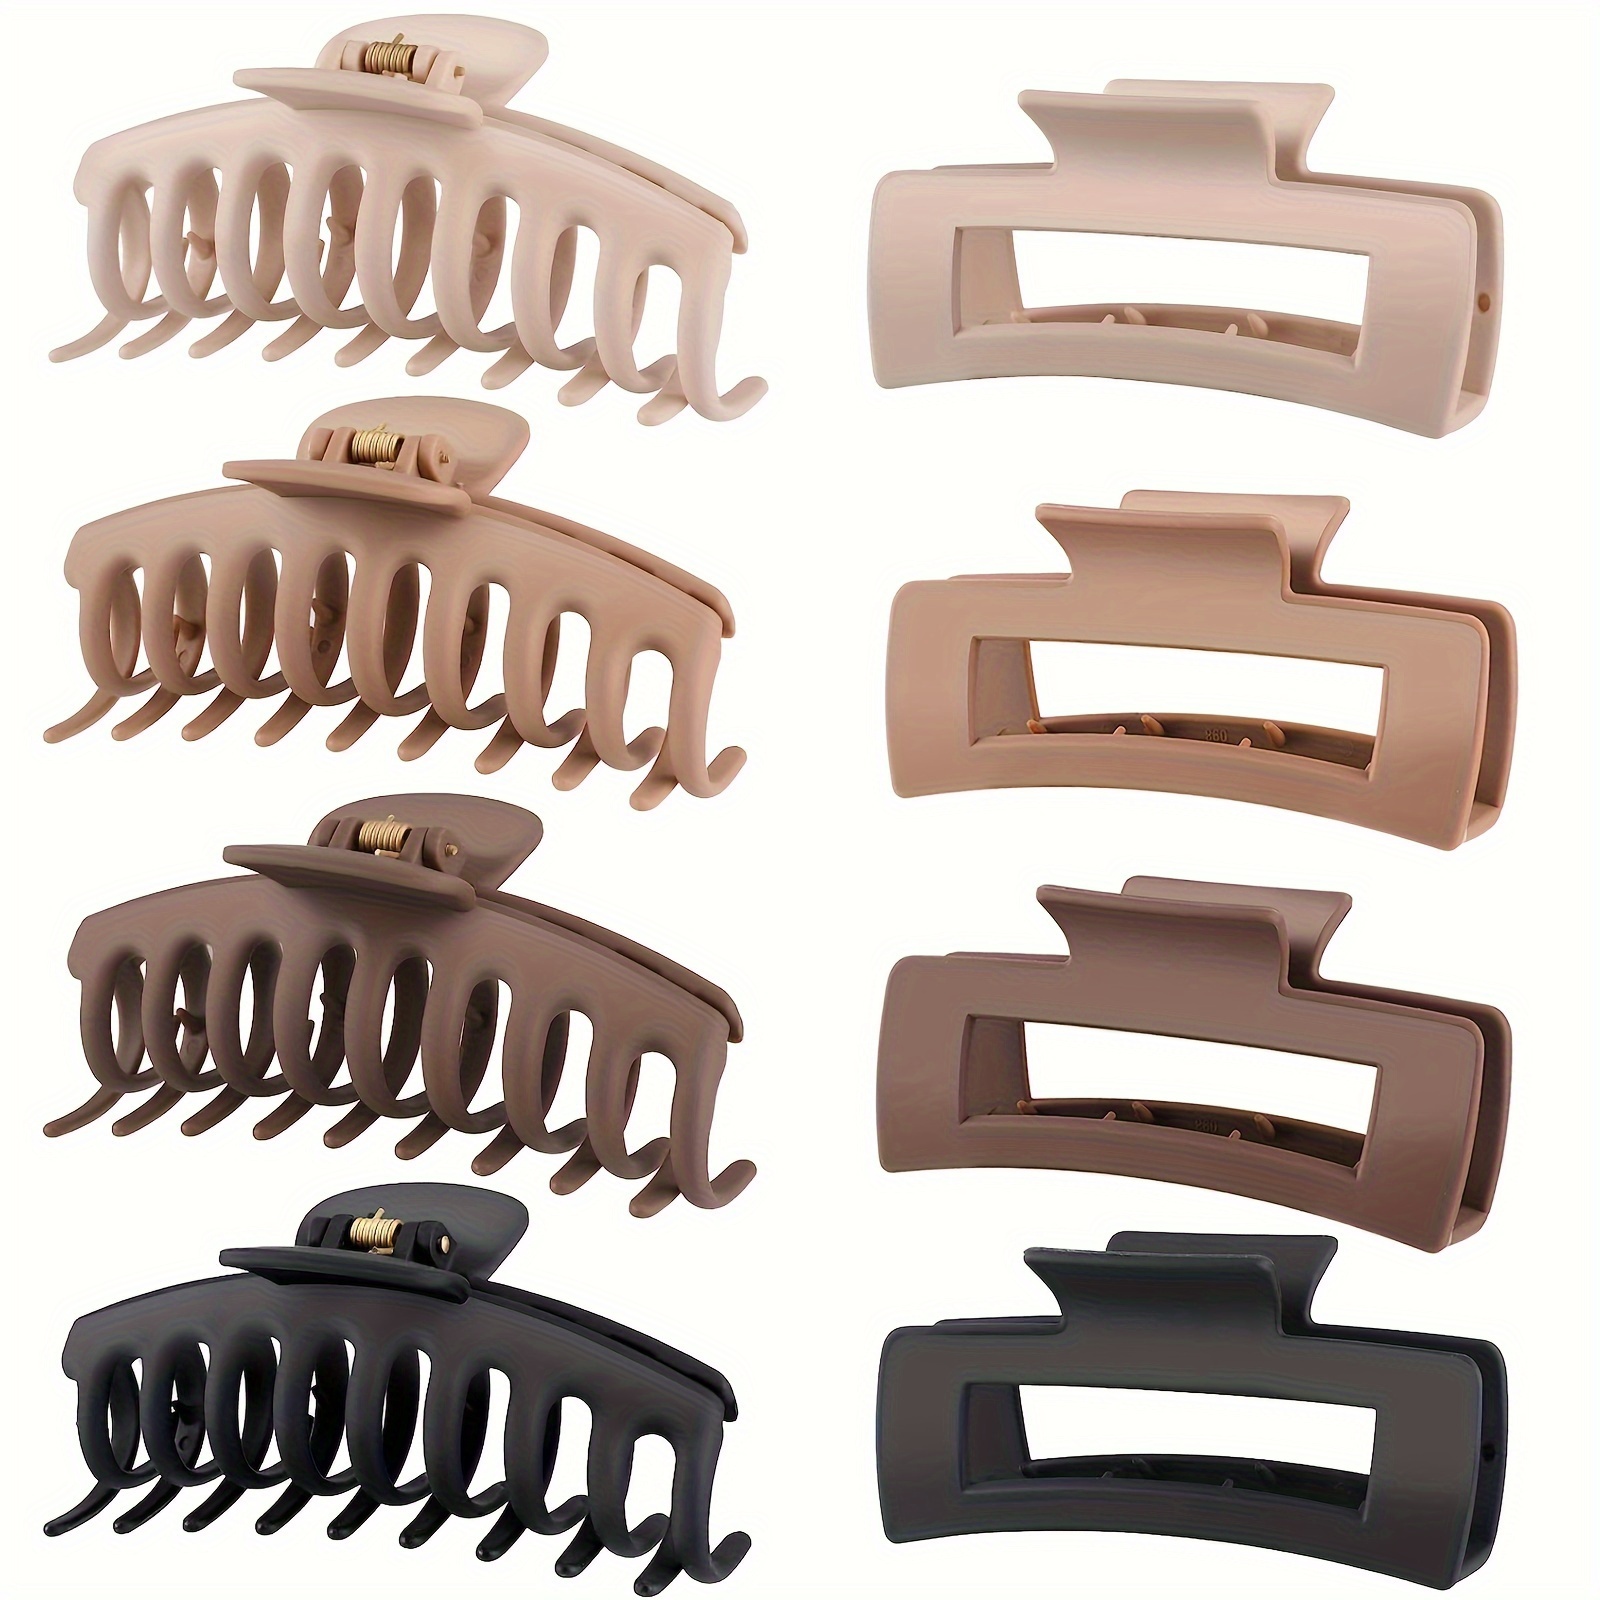 

8pcs Large Rectangular Hair Claw Clips, Non-slip Grip Hair Clips, Shark Clip Assortment For Thick Hair, Stylish Simple Design, Strong Hold Updo Accessories For Women